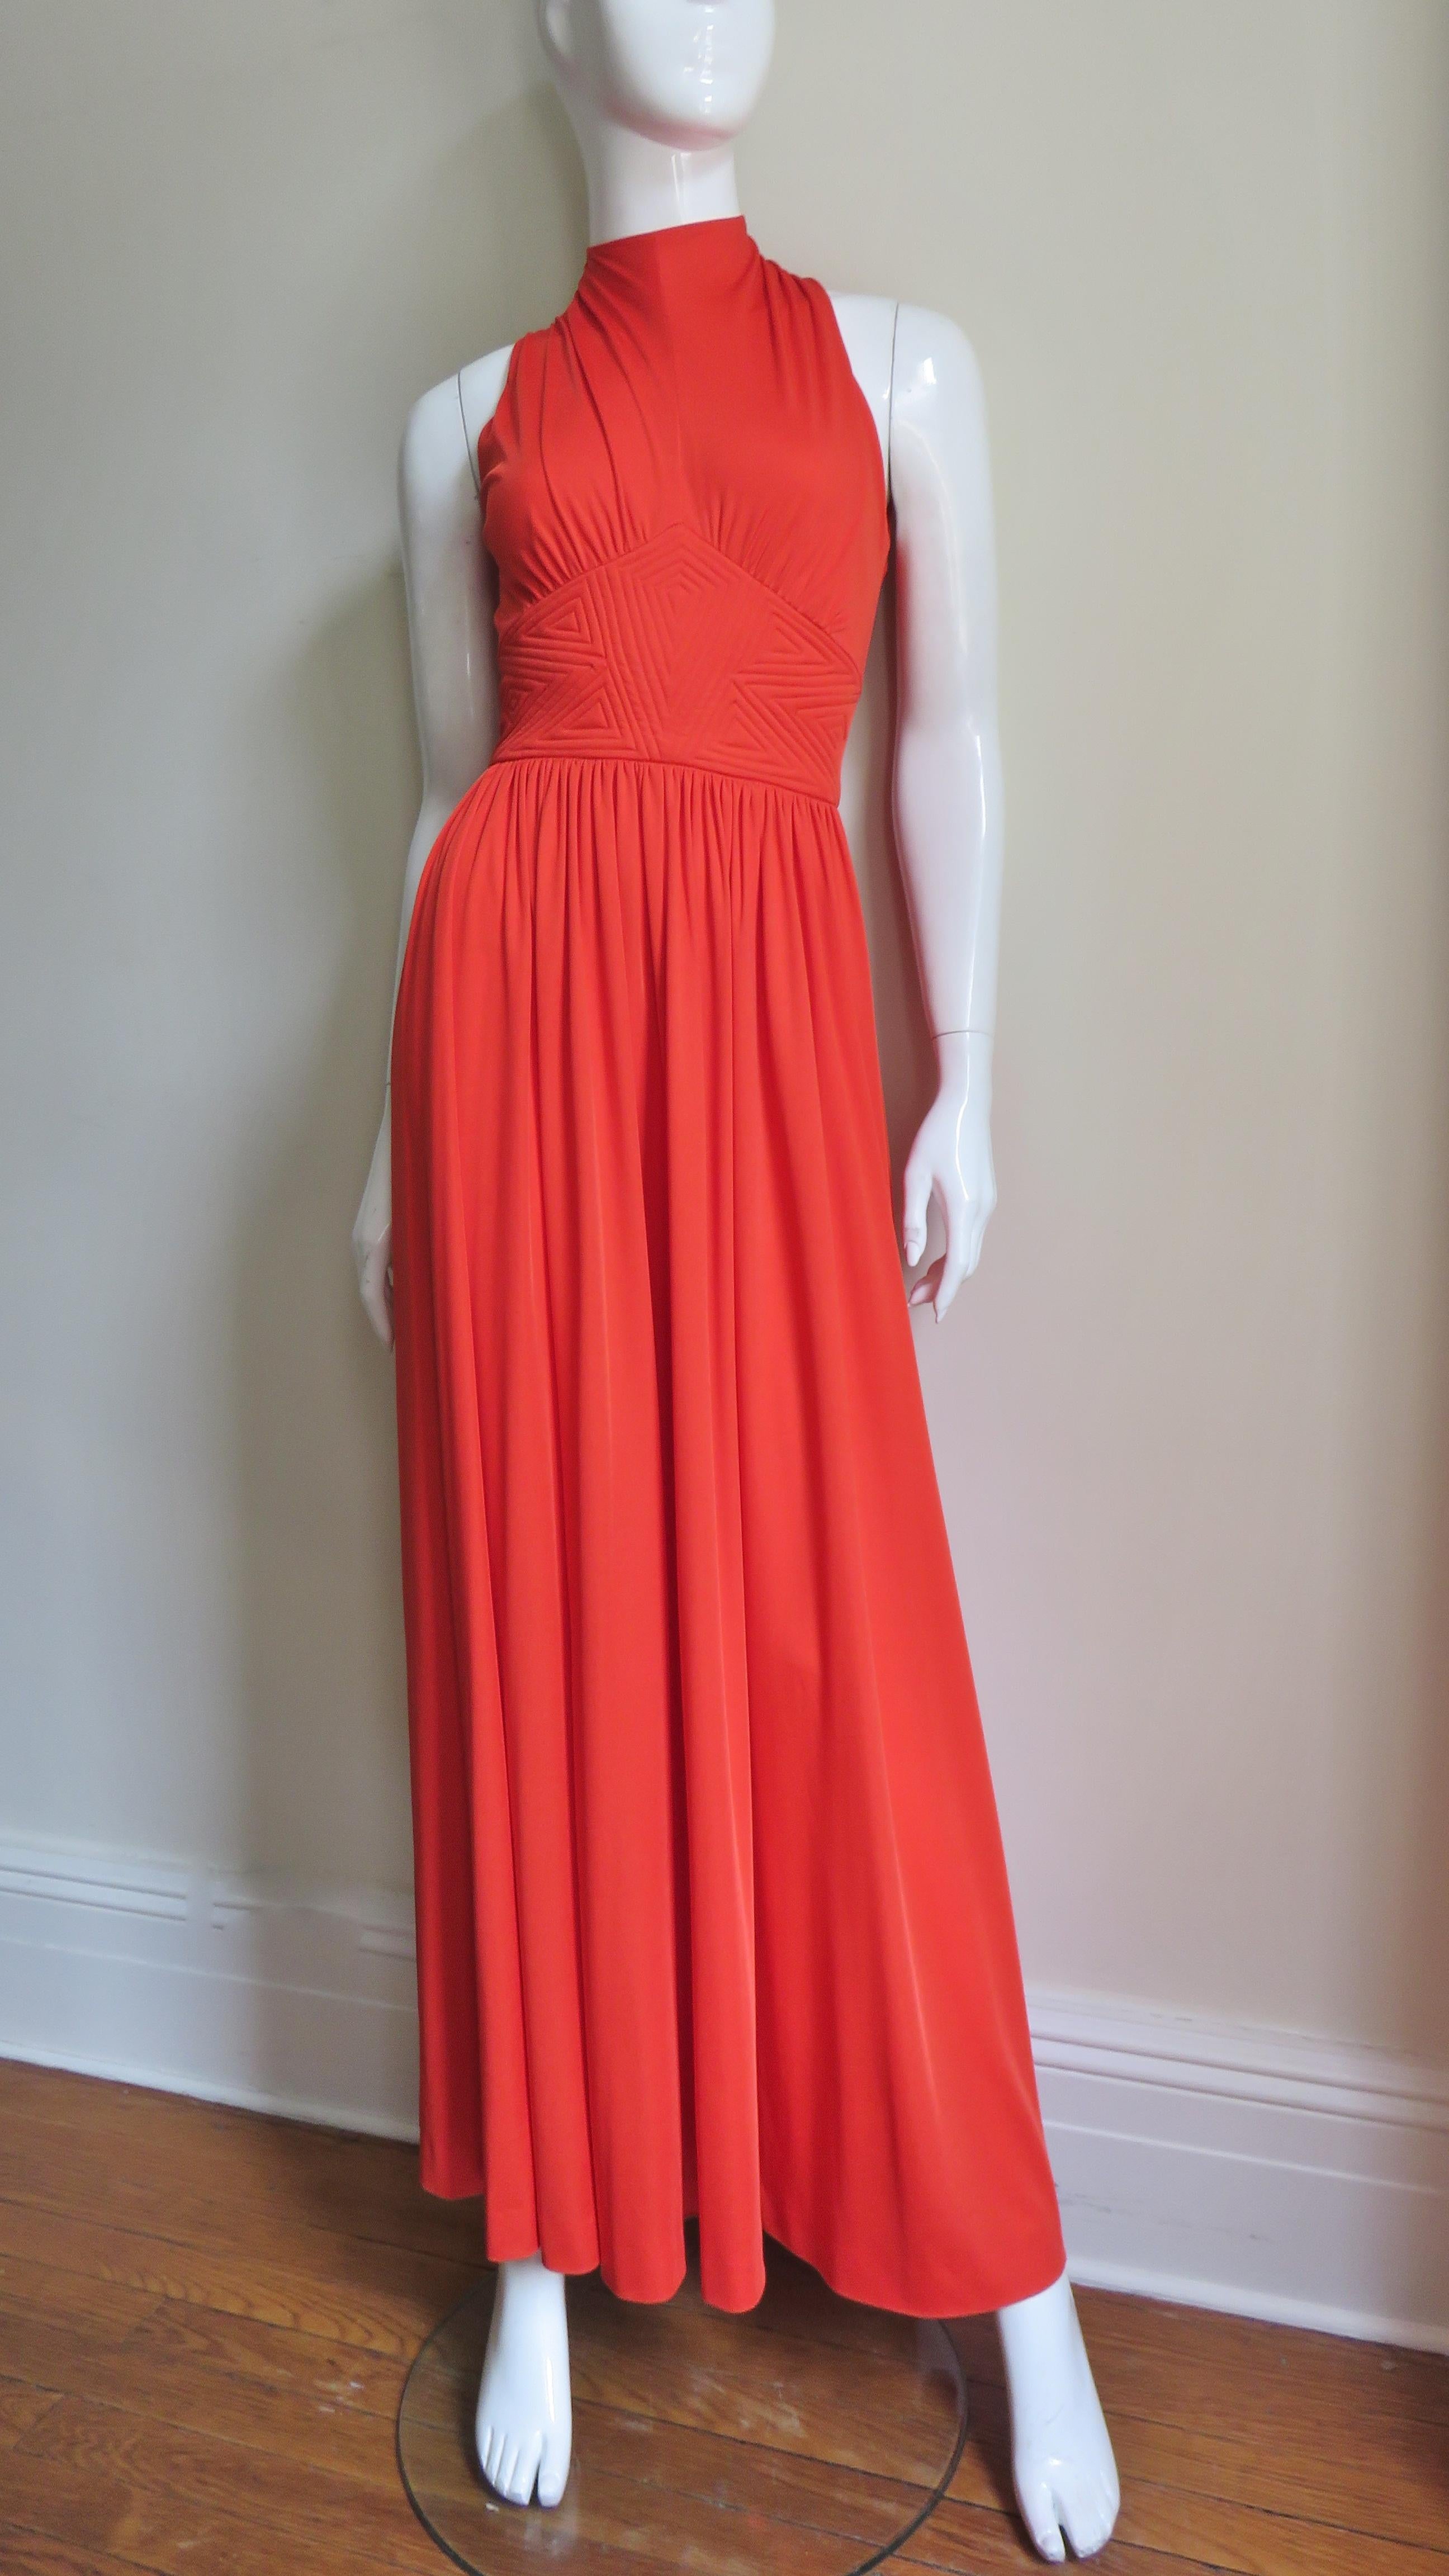 A beautiful orange jersey maxi dress designed by Donald Brooks with an elaborate band of trapunto embroidery at the waist.  The dress is sleeveless with cut in shoulders, a high neckline and an inset at the waist coming to a point just below the